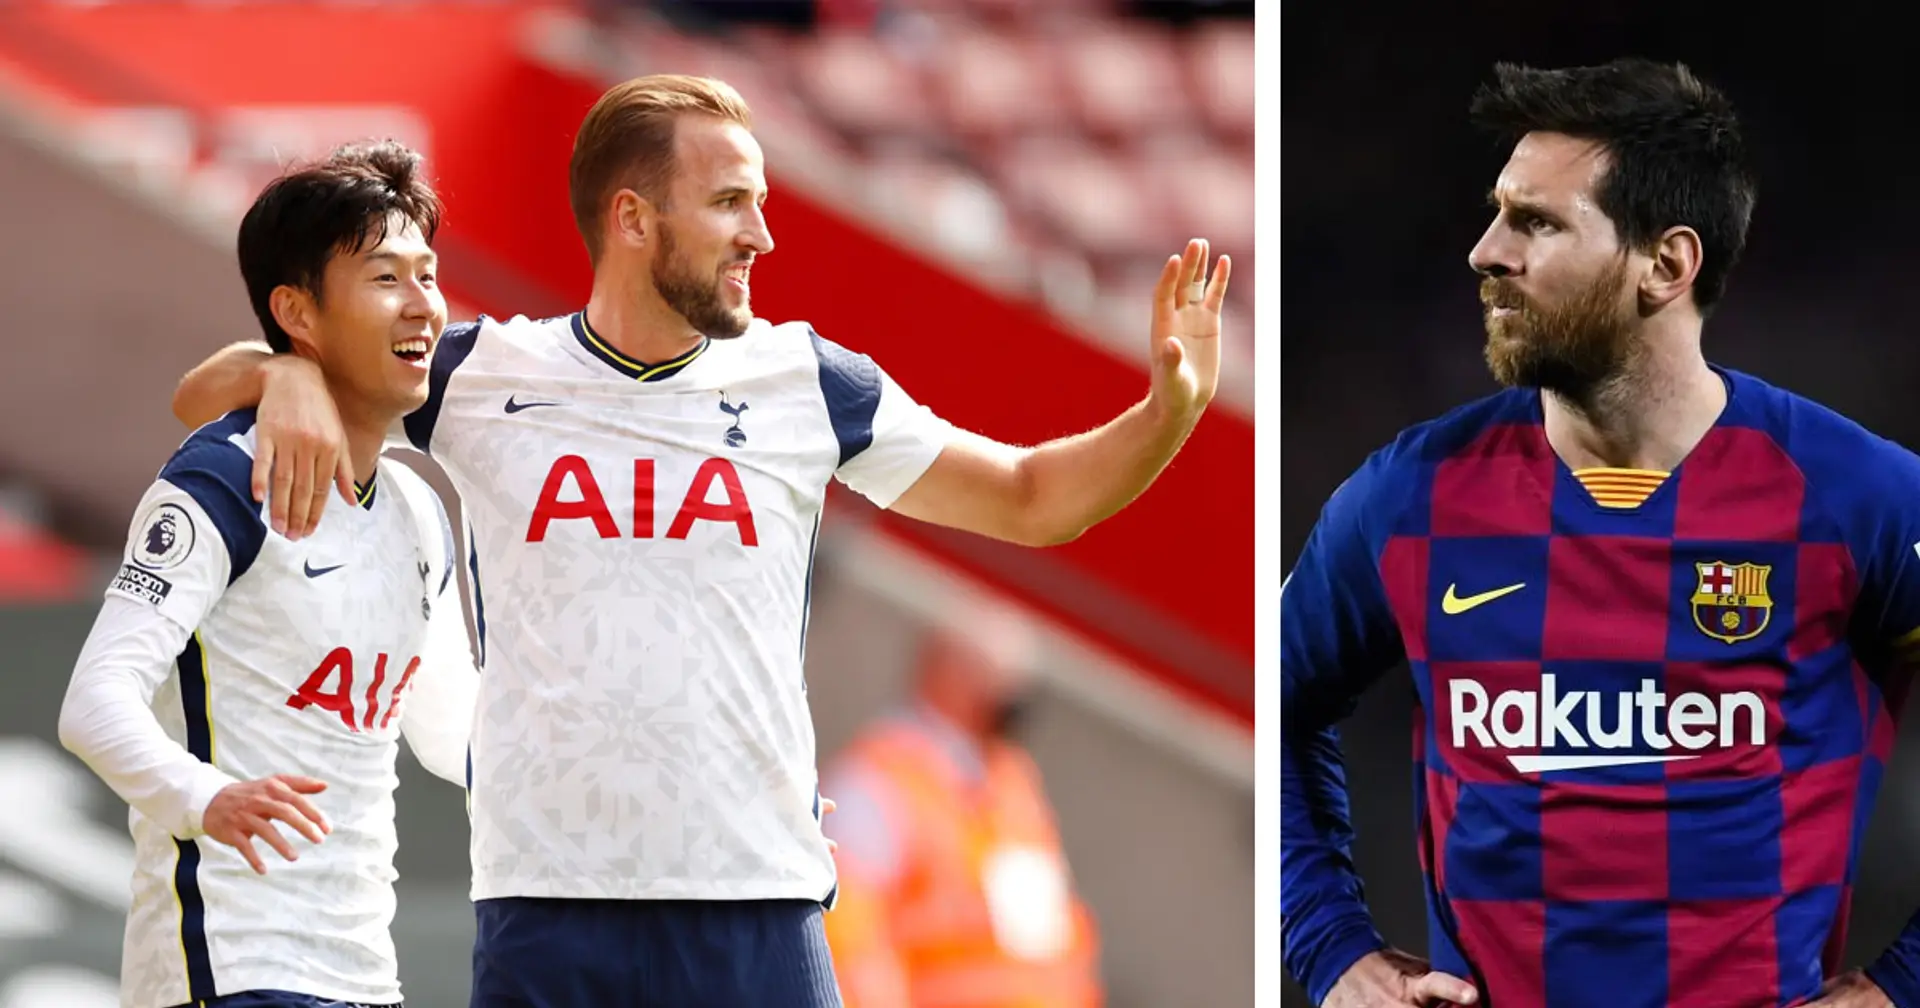 Leo Messi scores most goals since 2016 but still behind Tottenham duo among Europe's deadliest finishers in Europe's top-5 leagues